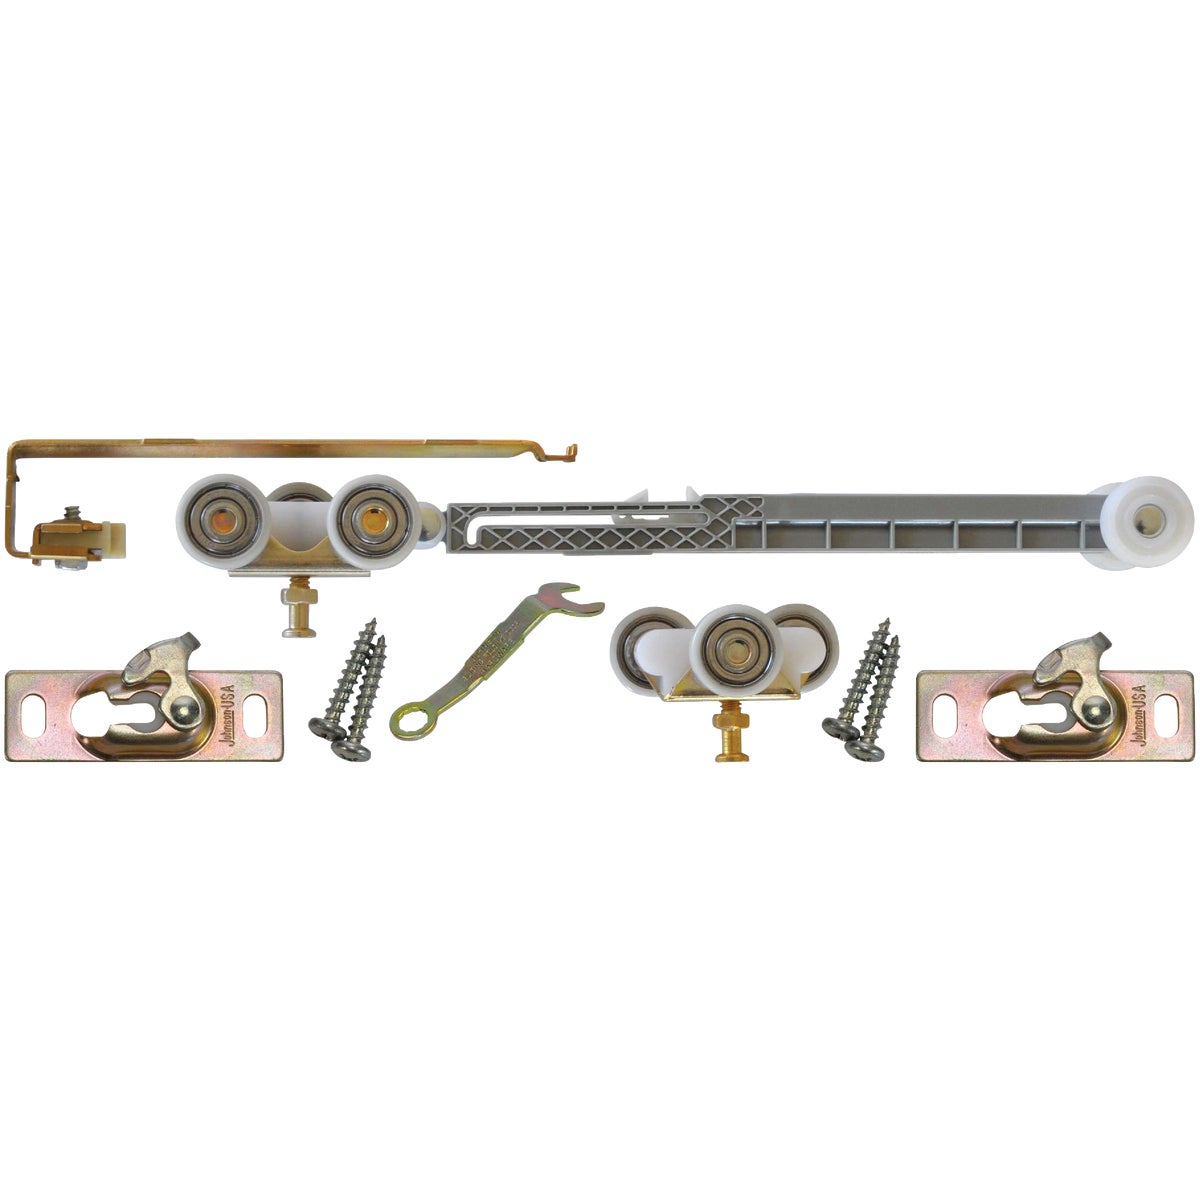 Item 209360, The 1060 Soft Close Hardware Kit makes your sliding doors close softly and 